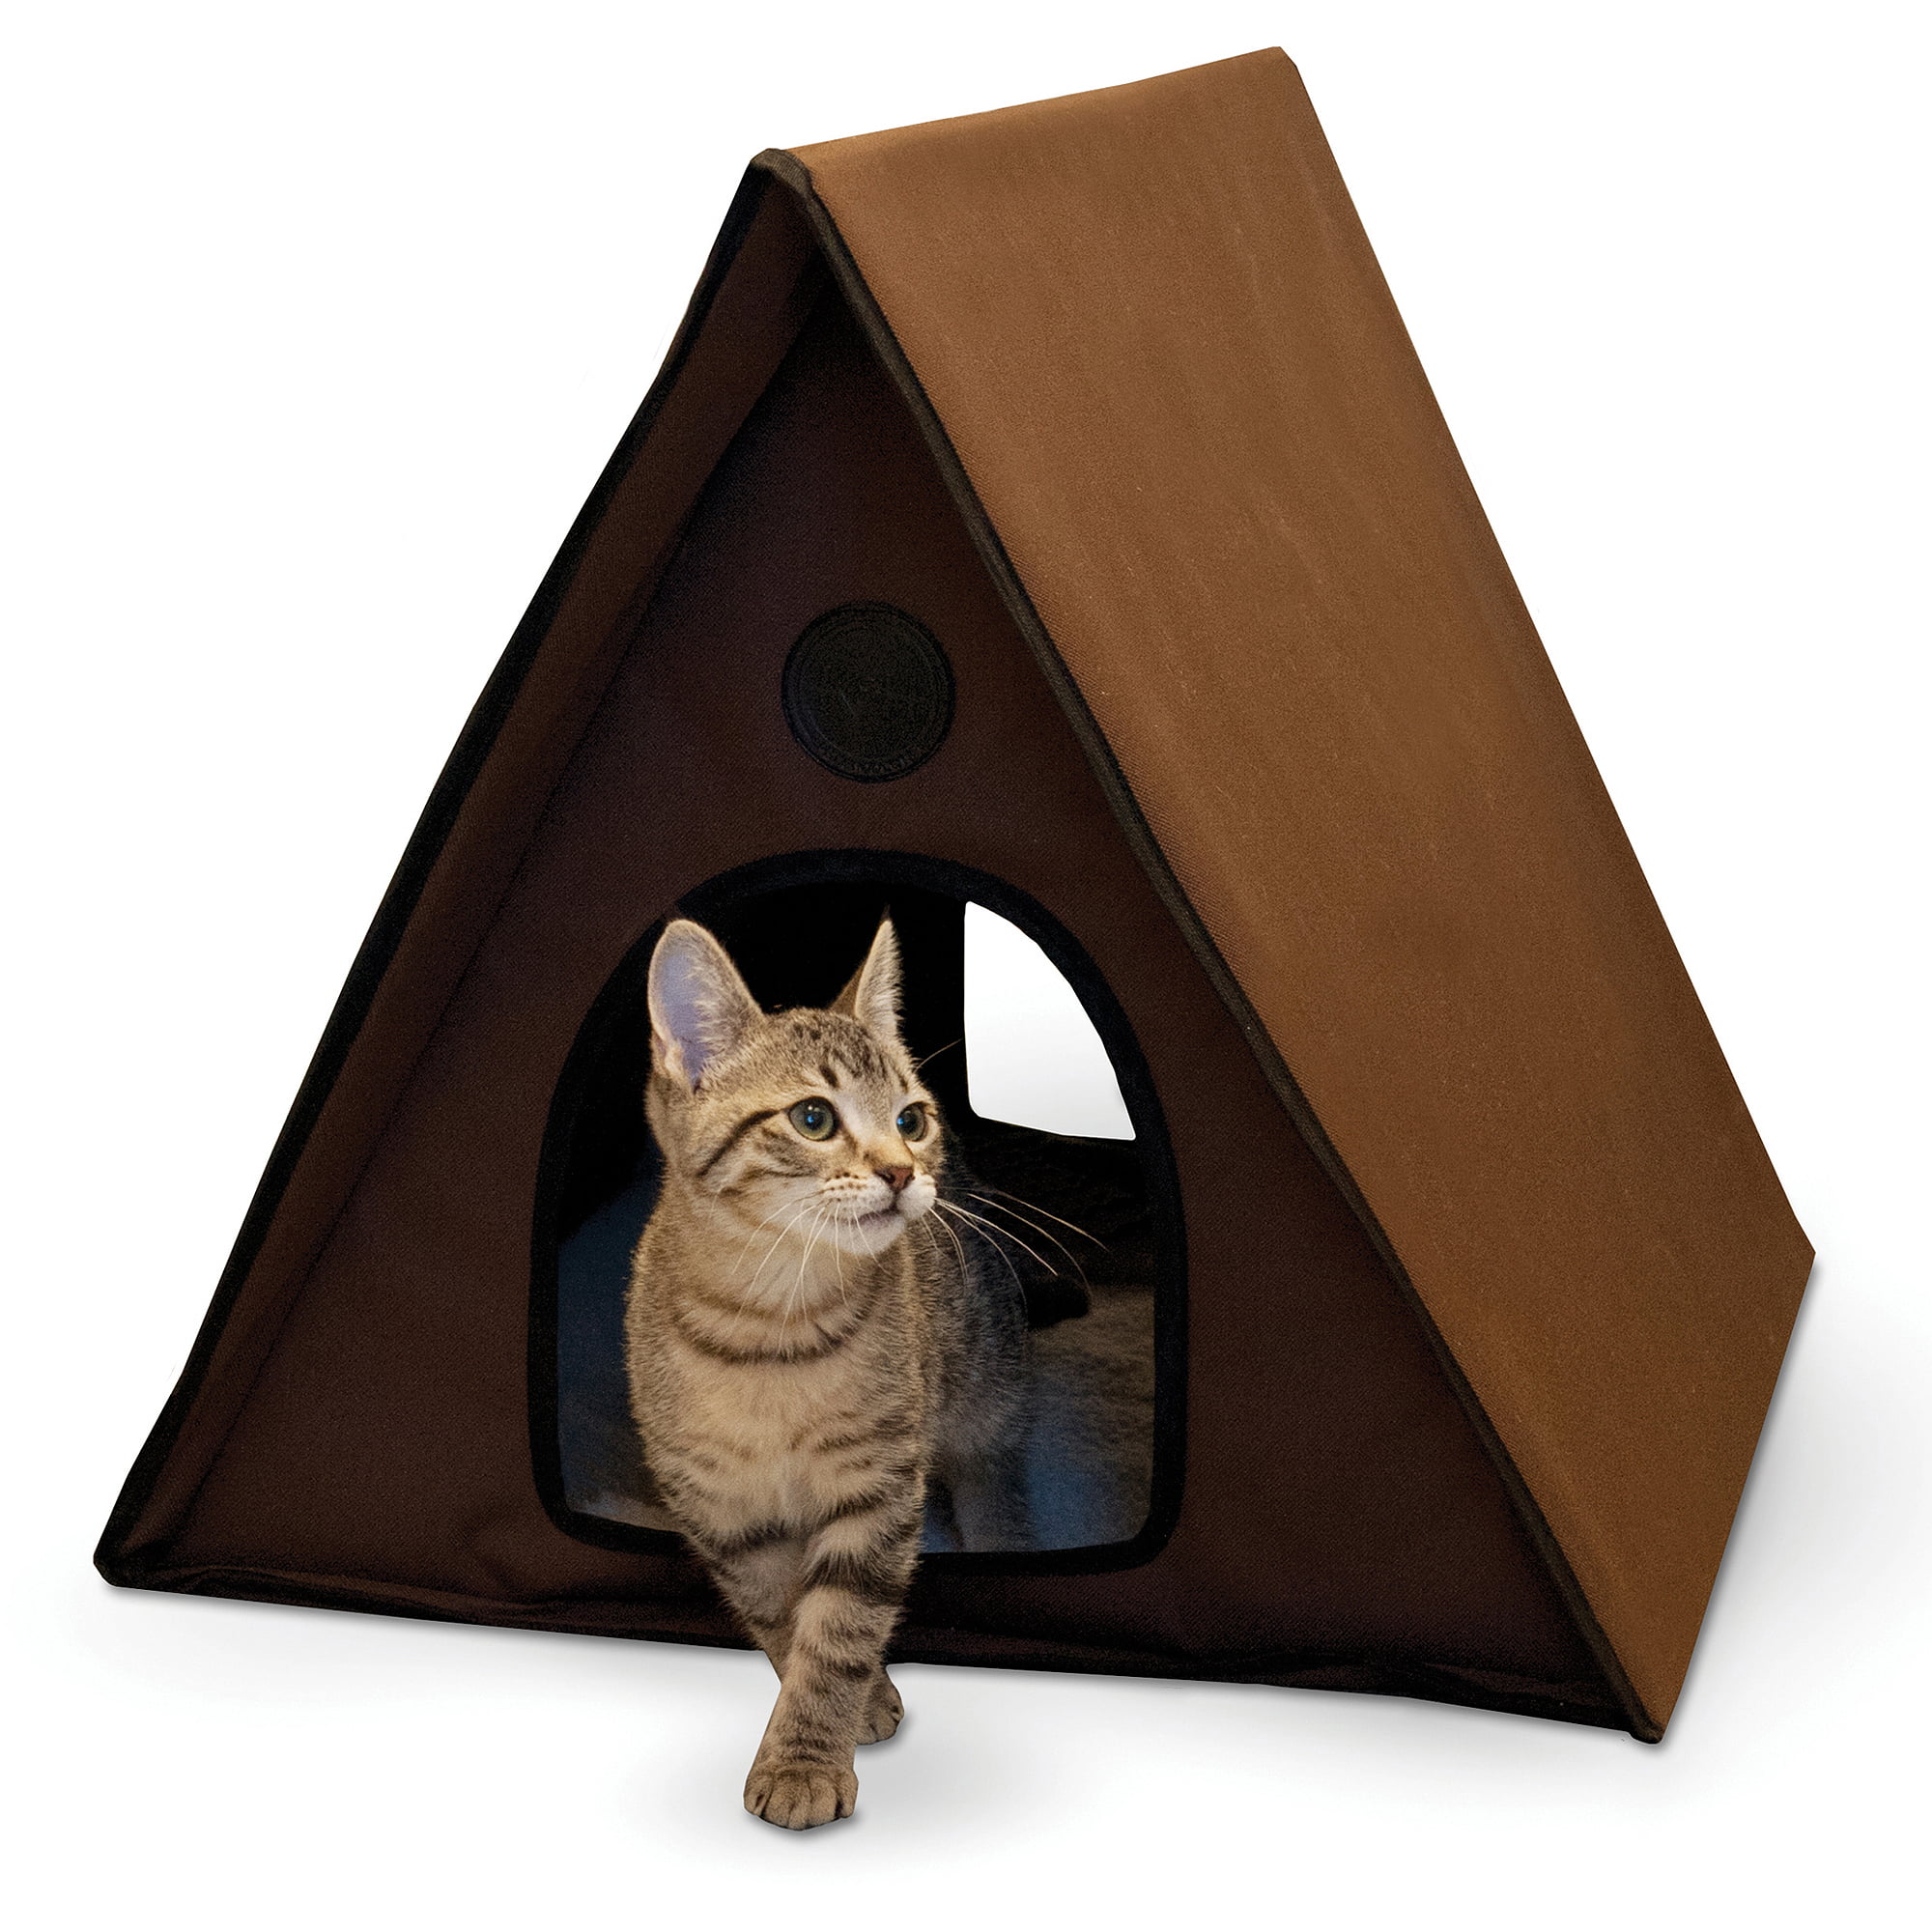 k&h outdoor heated cat house